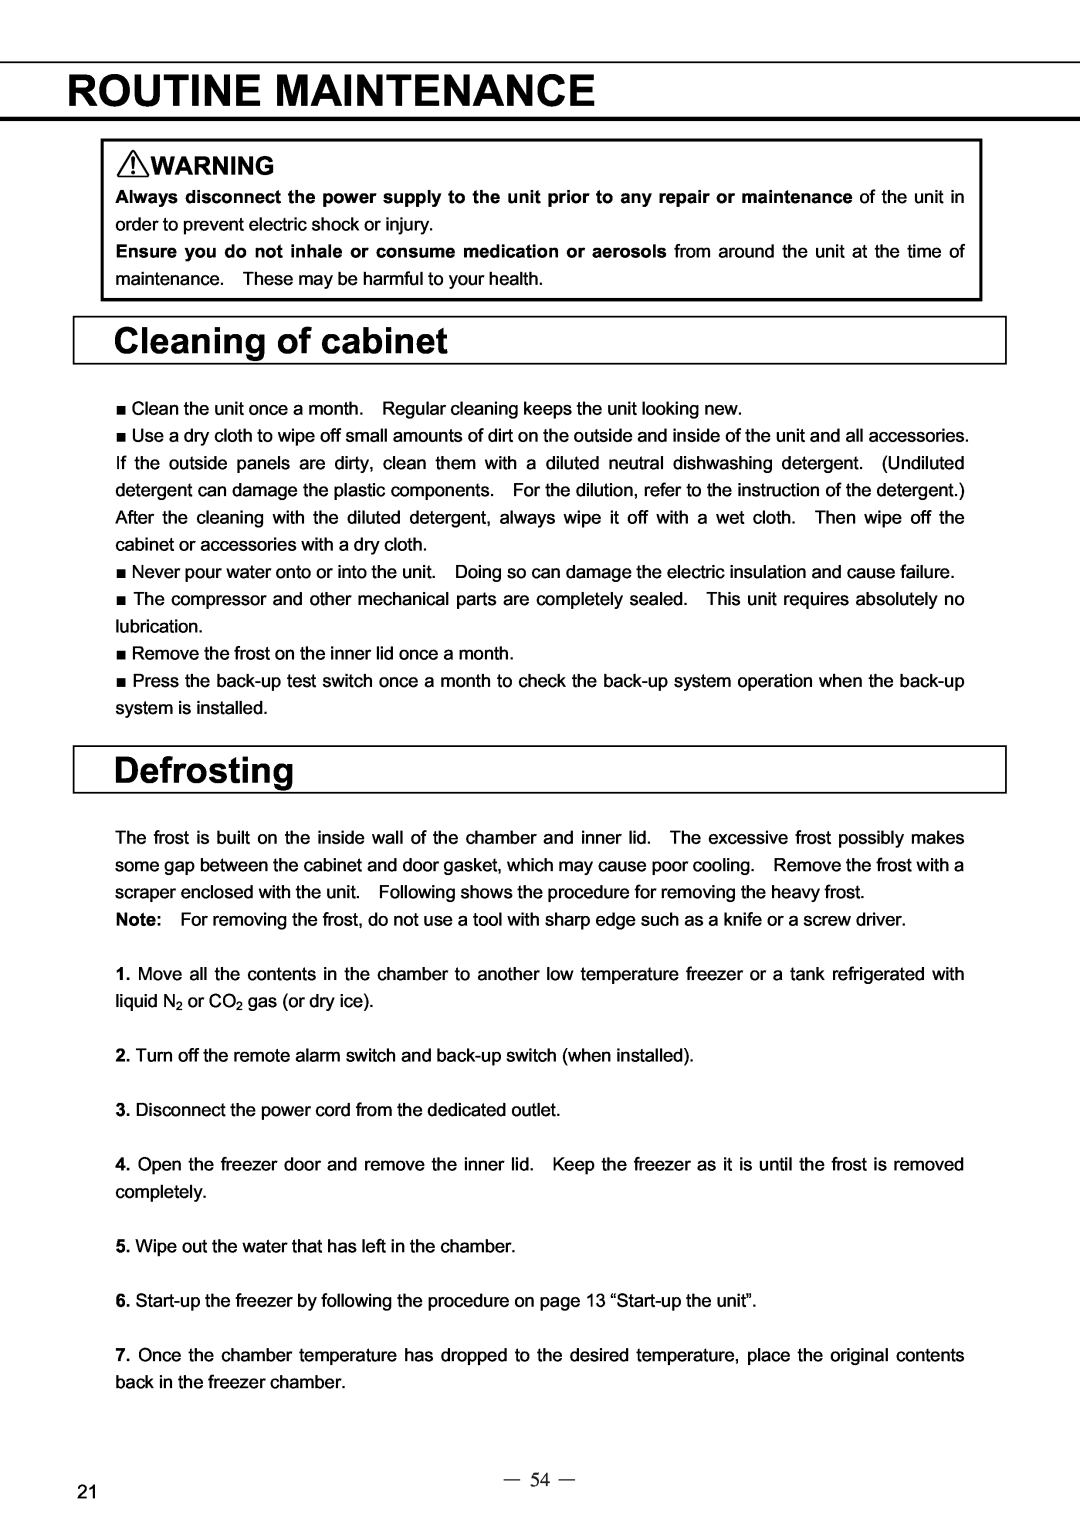 Sanyo MDF-C8V service manual Routine Maintenance, Cleaning of cabinet, Defrosting 